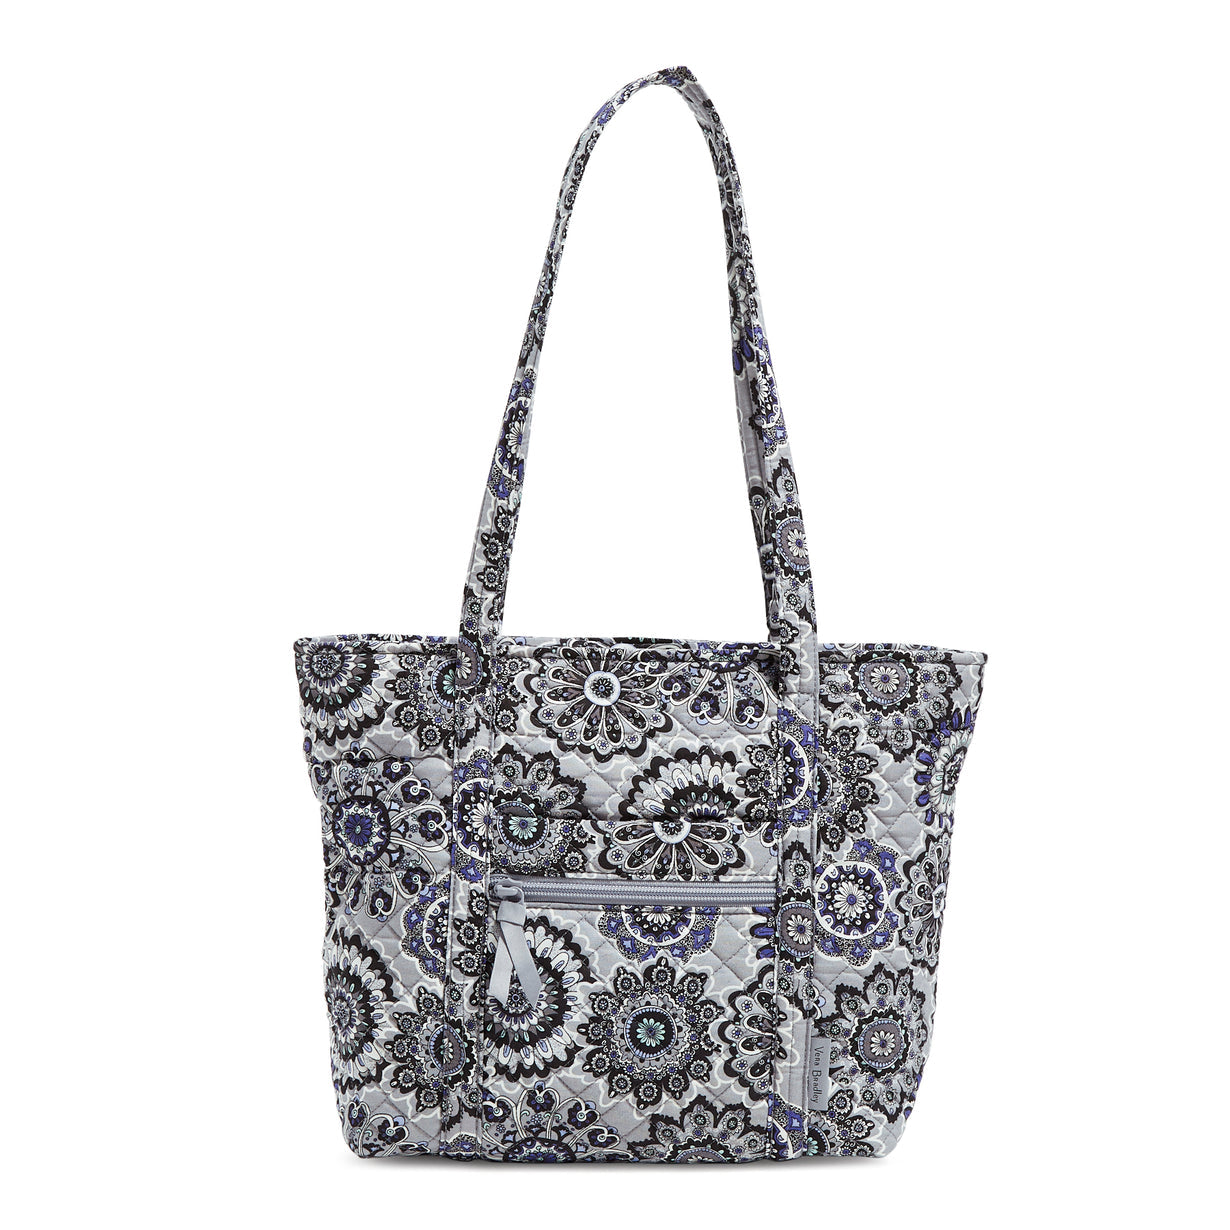 A Small Vera Tote Bag in Tranquil Medallion. Designed by Vera Bradley from recycled cotton fabric.